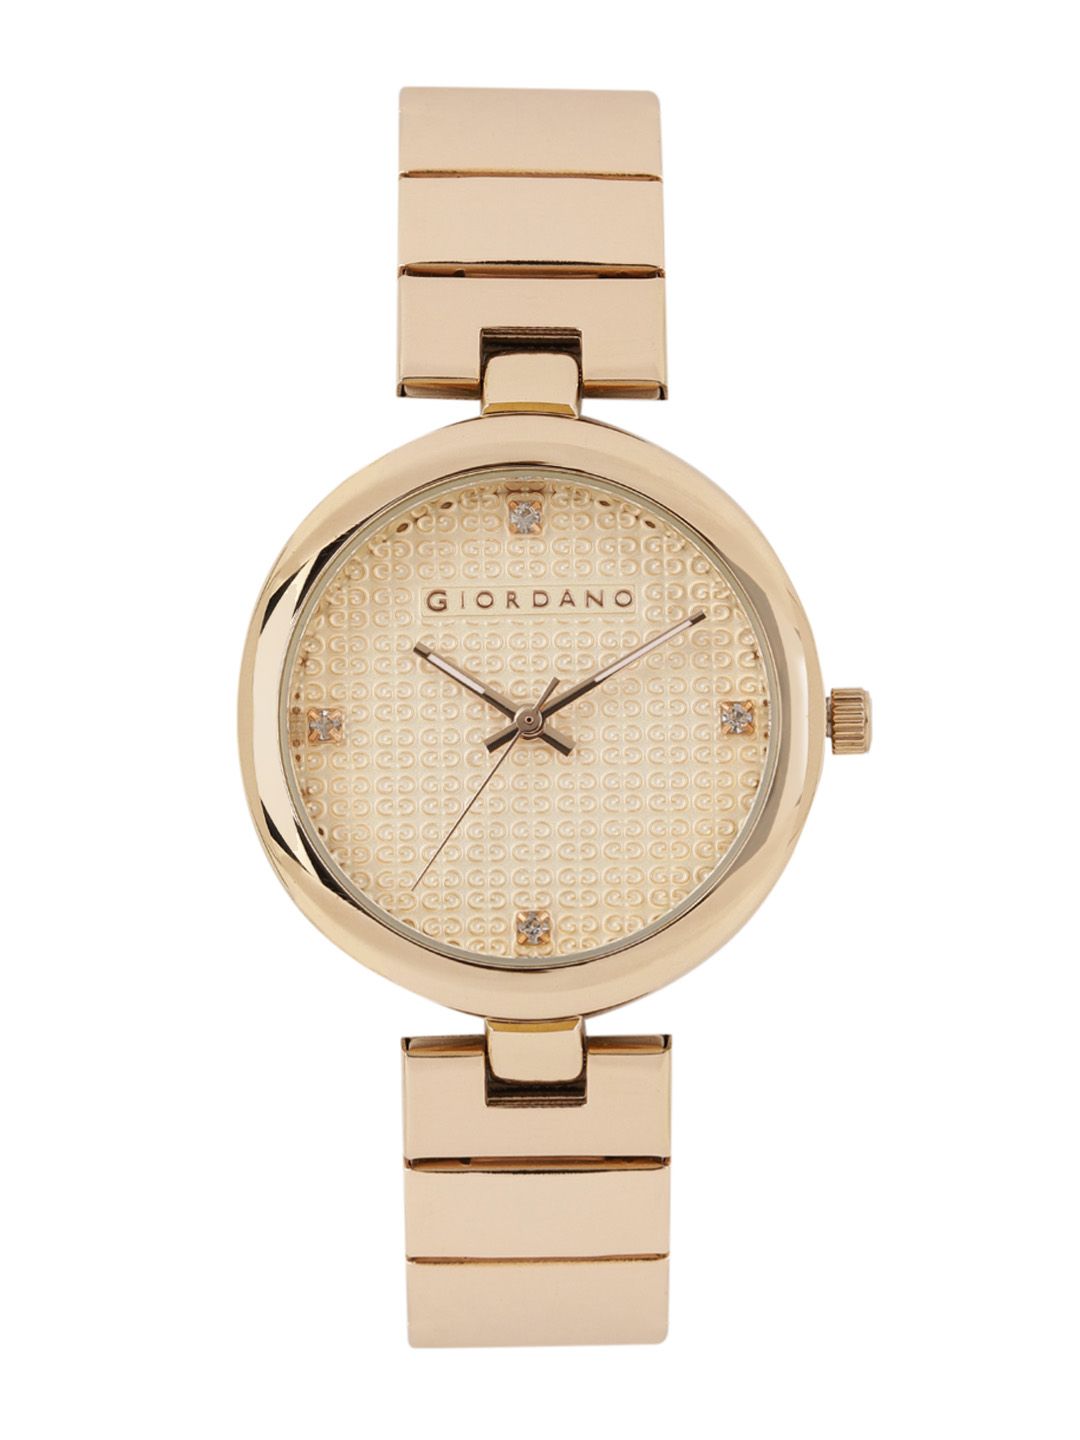 GIORDANO Women Gold-Toned Textured Analogue Watch A2059-44 Price in India